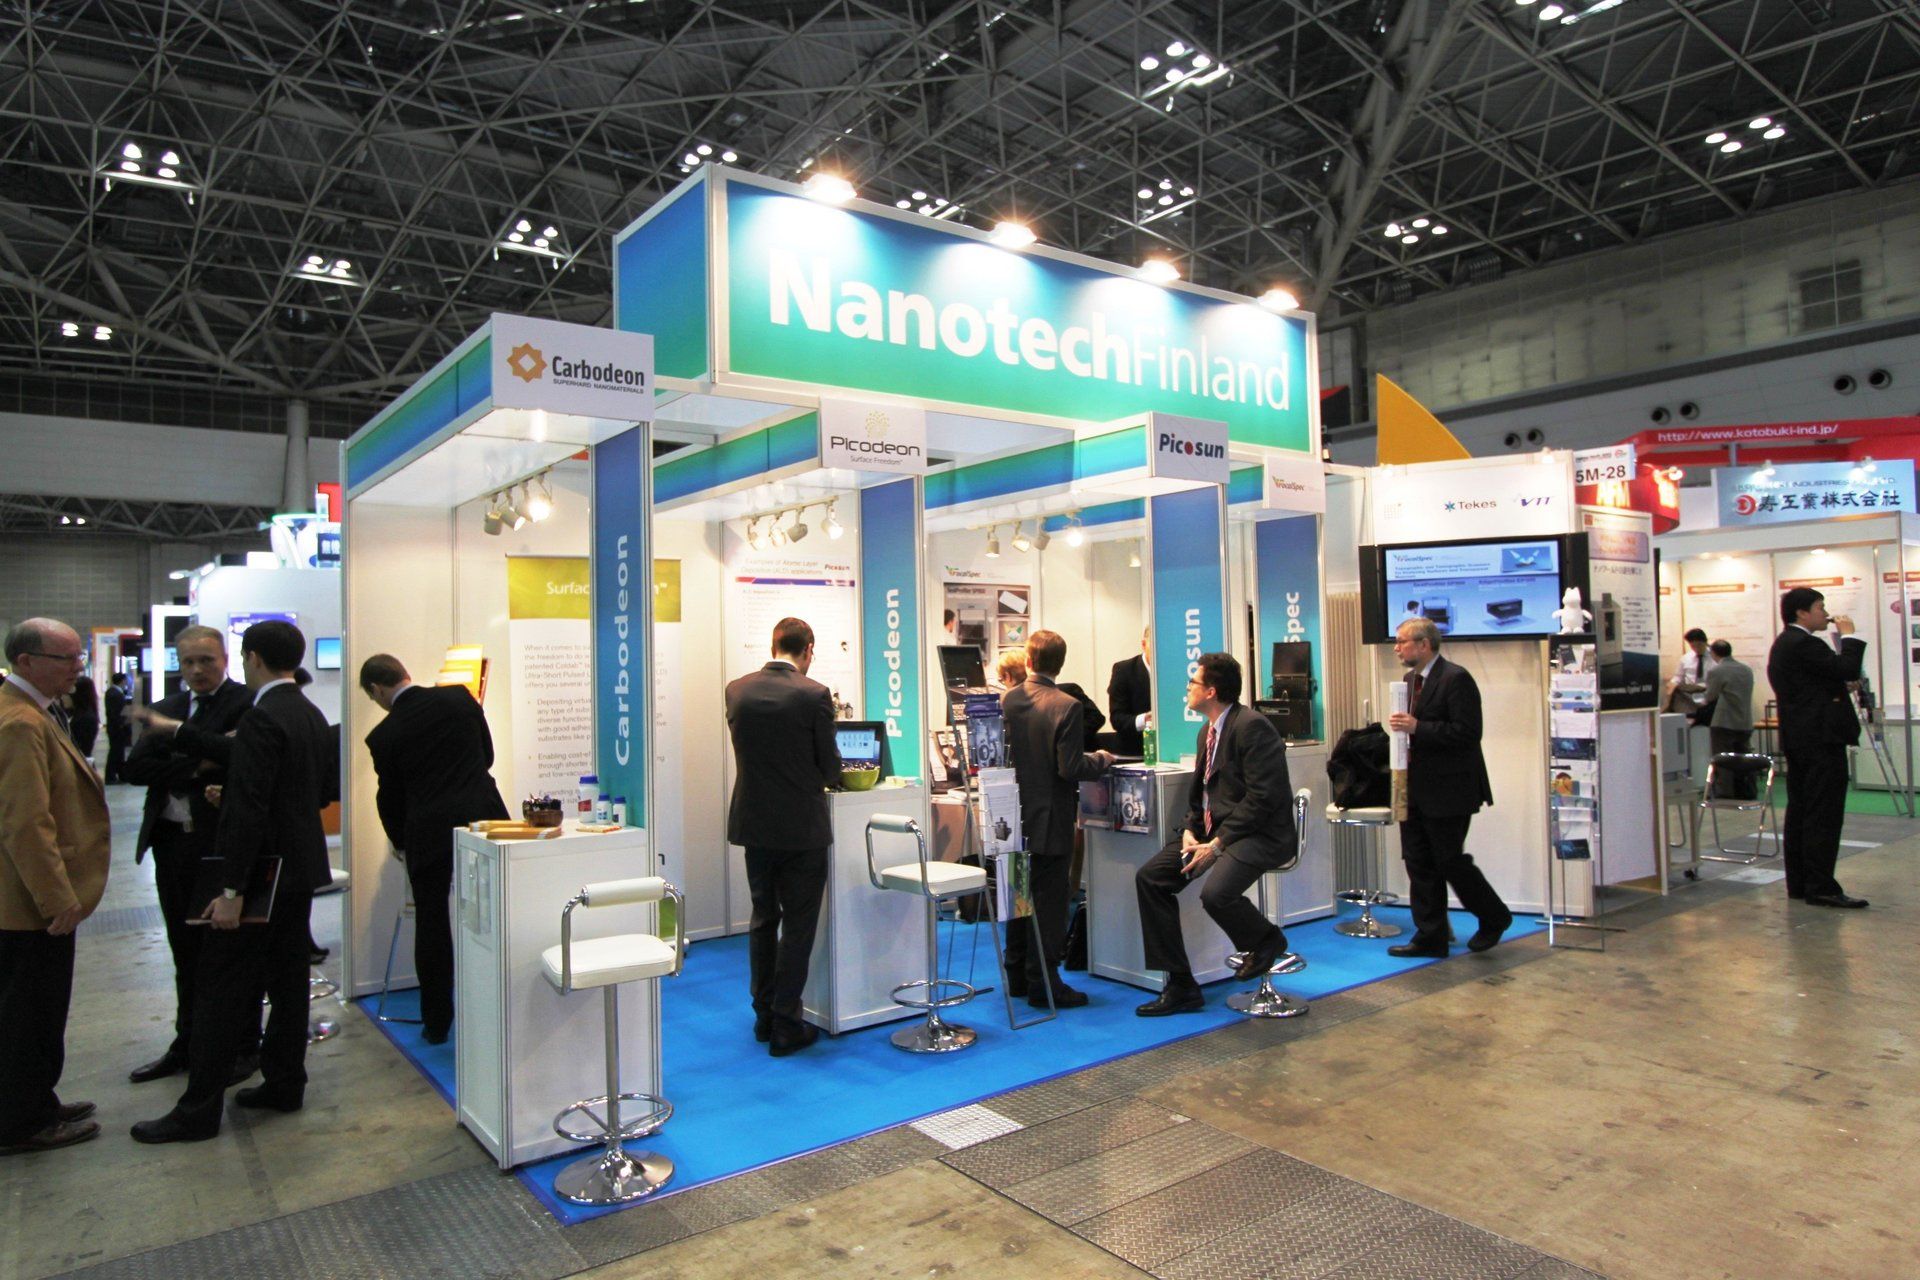 Finland Pavilion @ Nano Tech 2013. Booth designed and built by Essential Global Fairs.